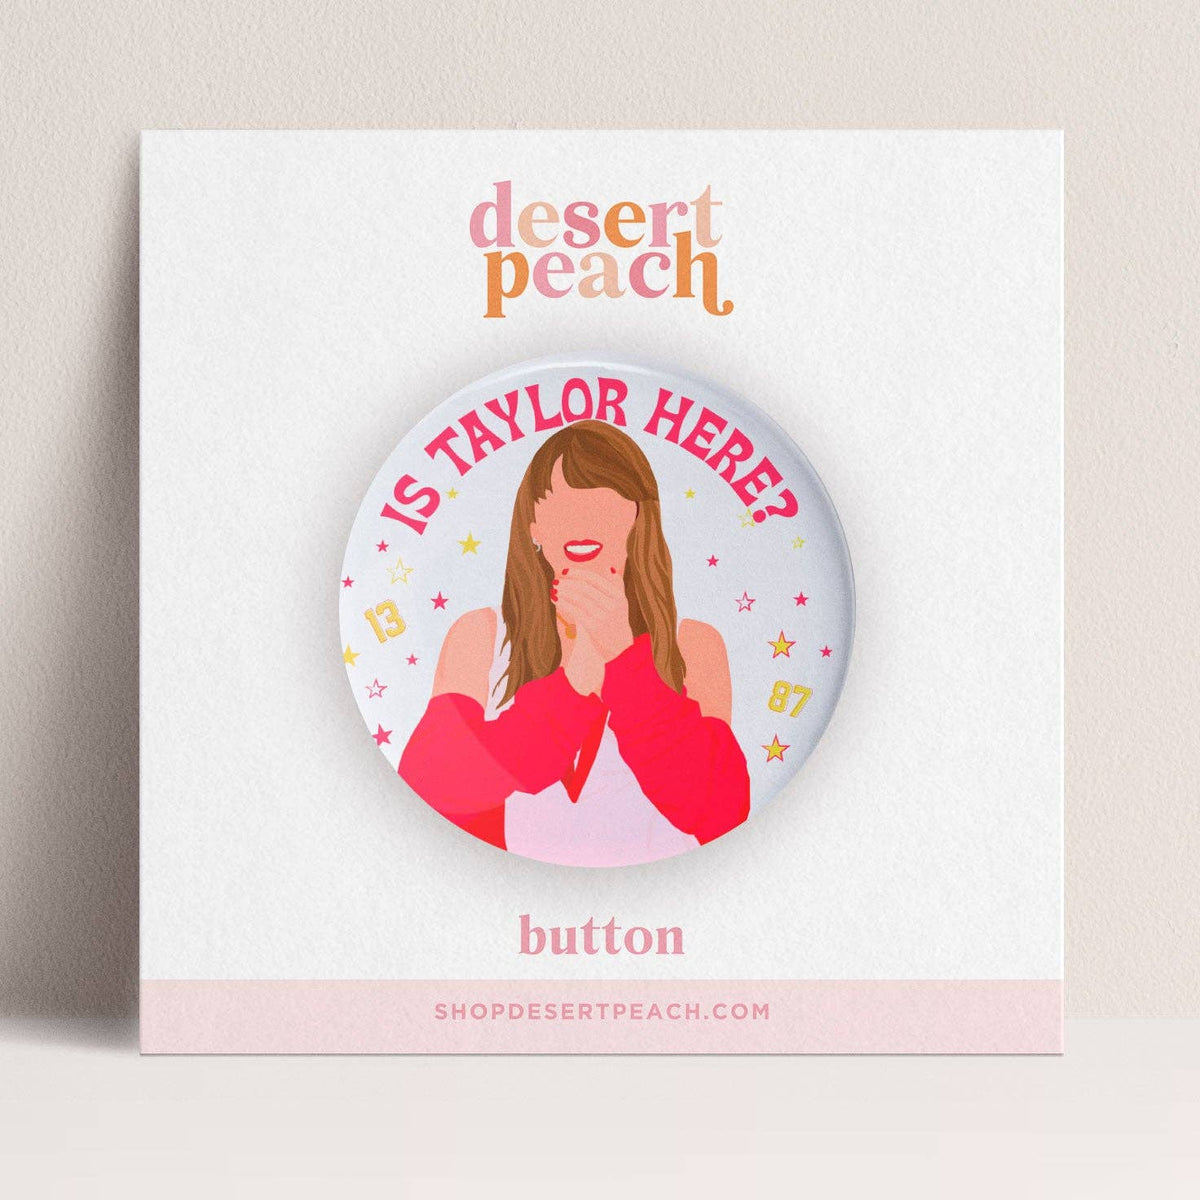 Is Taylor Here Pinback Button